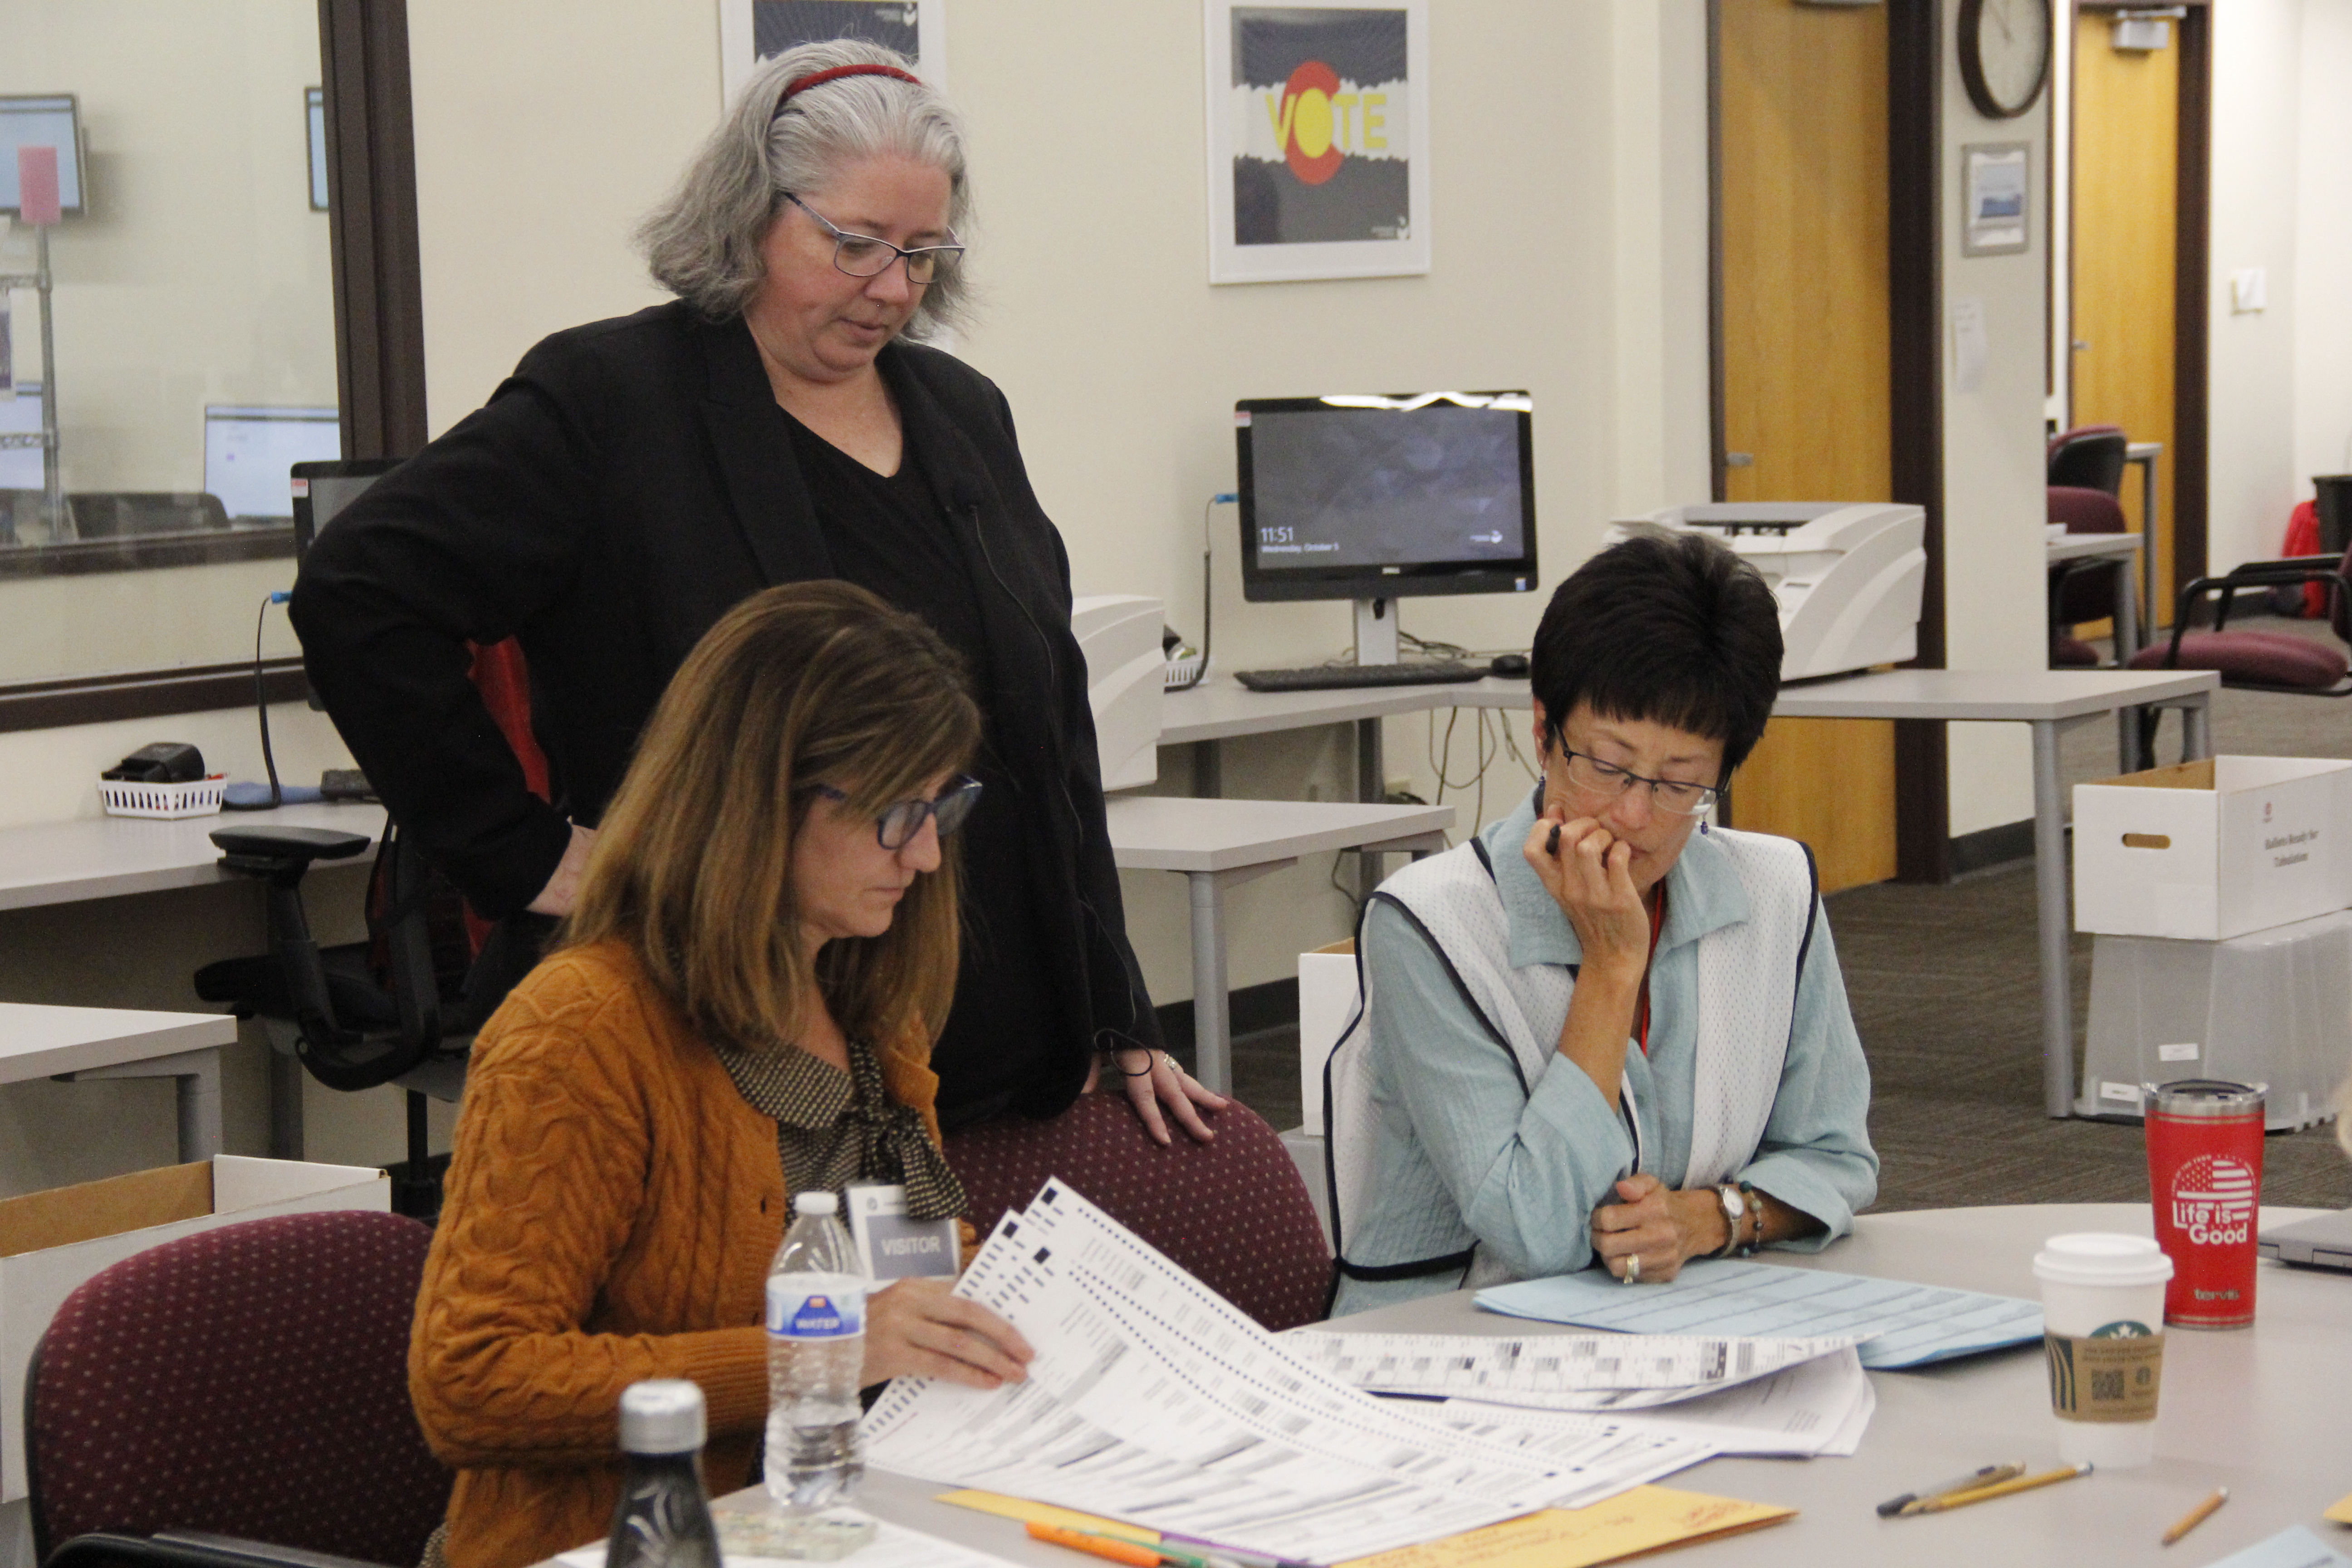 Depurty Dir. of Elections Peg Perl looks on as testing board members inspect test ballots for the 2022 LAT.